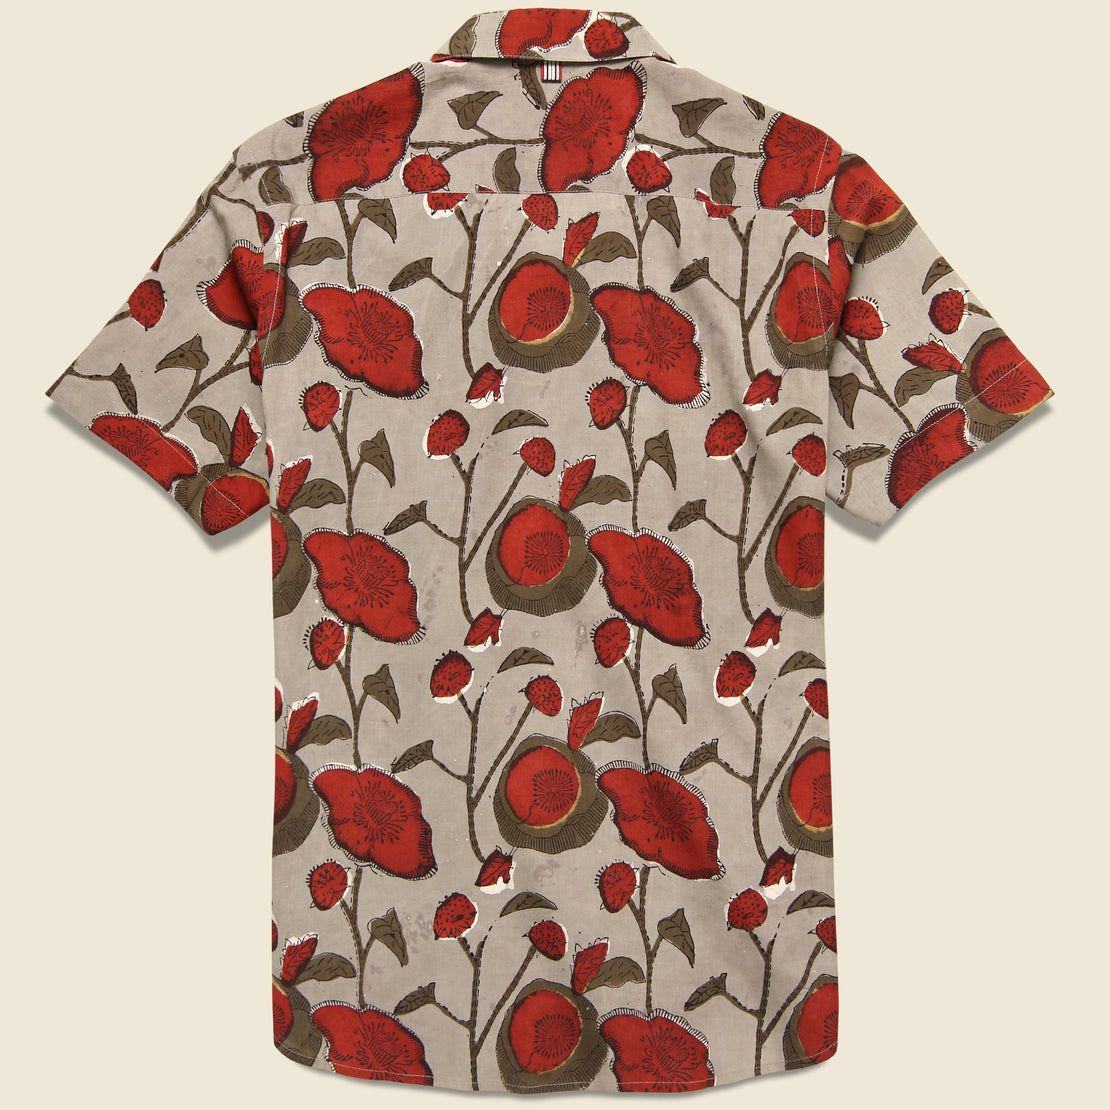 Lamar Poppy Floral Block Print Shirt - Beige/Red - Kardo - STAG Provisions - Tops - S/S Woven - Floral